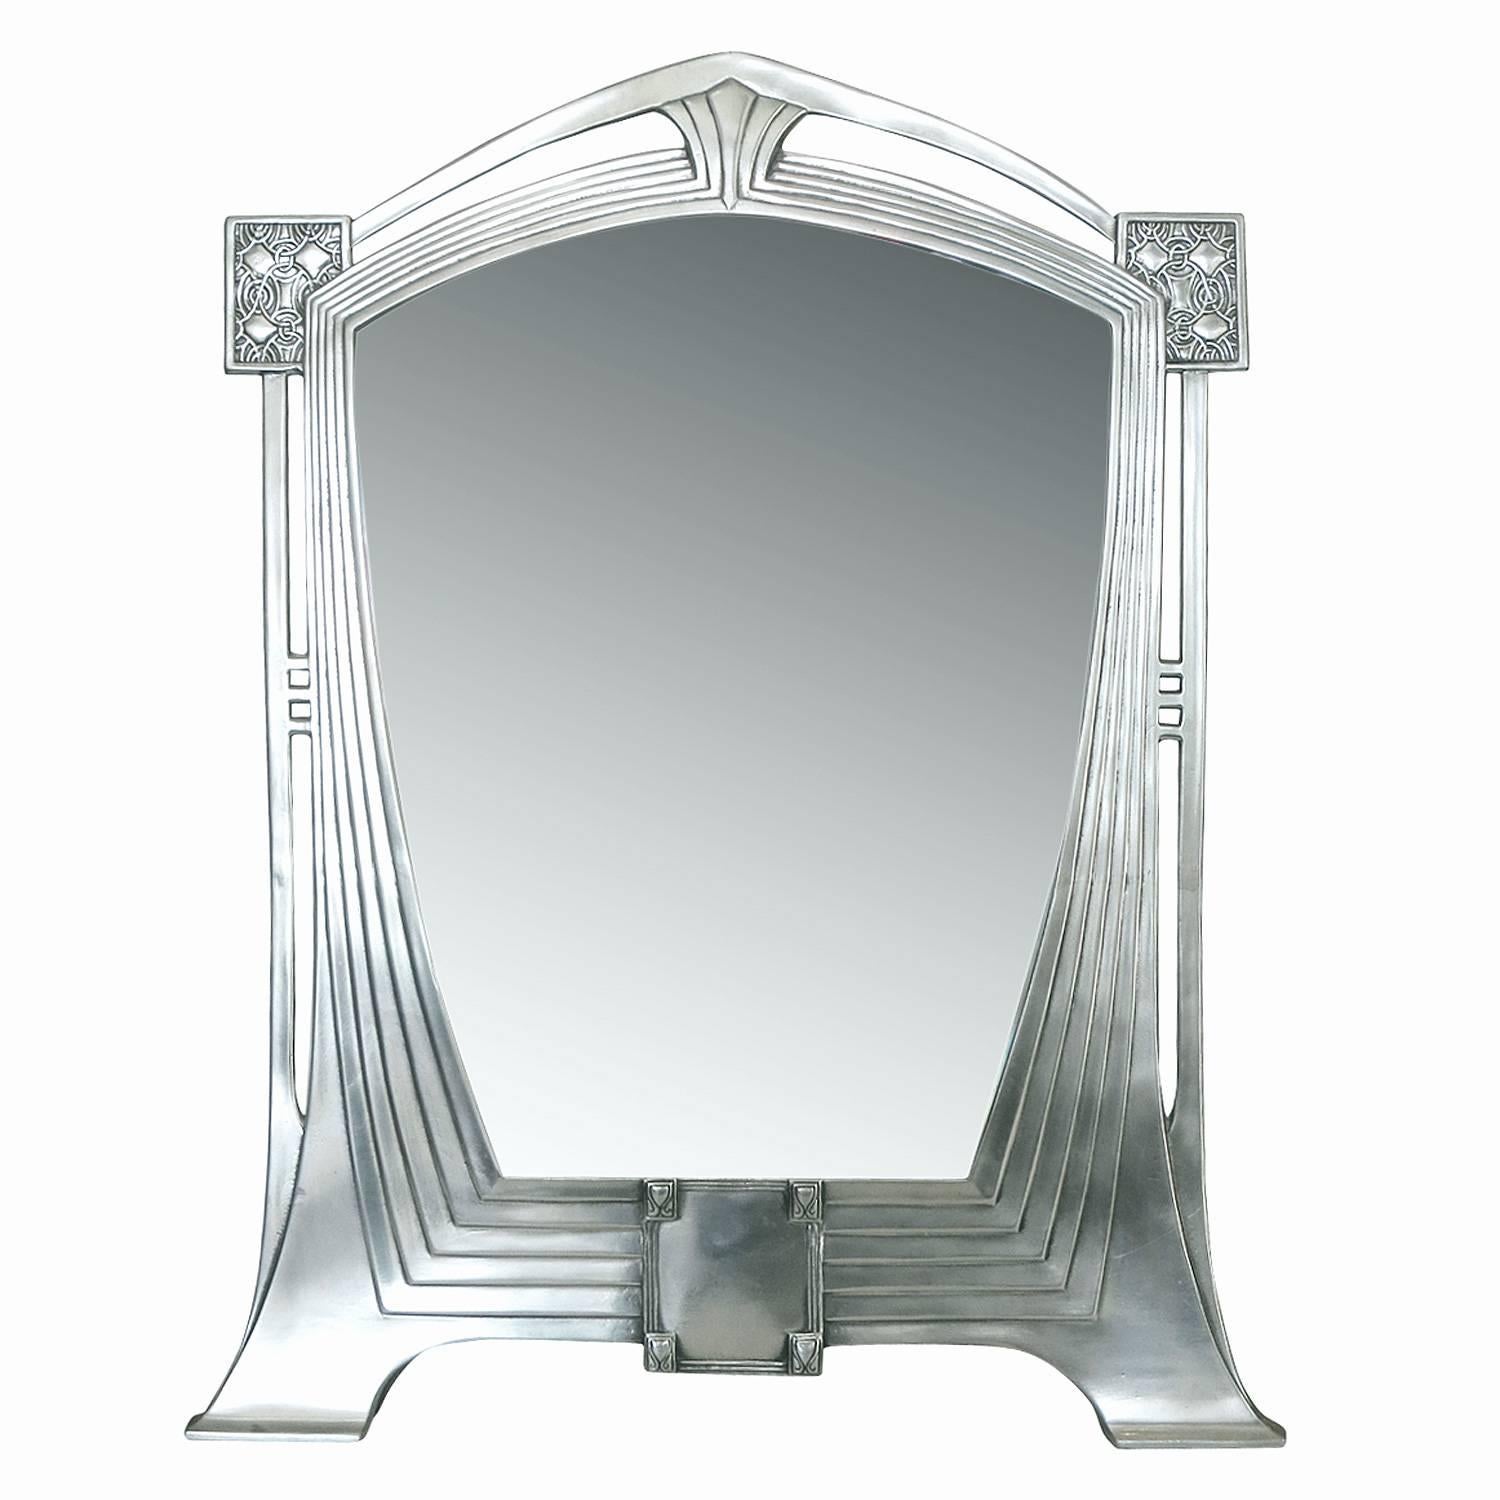 Art Nouveau Style Pewter table mirror. Cast in heavy solid pewter and highly polished with a solid Wood back. 

Foundry marks on back, Unsigned. Imported from France.

Product Handcrafted in the USA with the highest quality materials and over 30